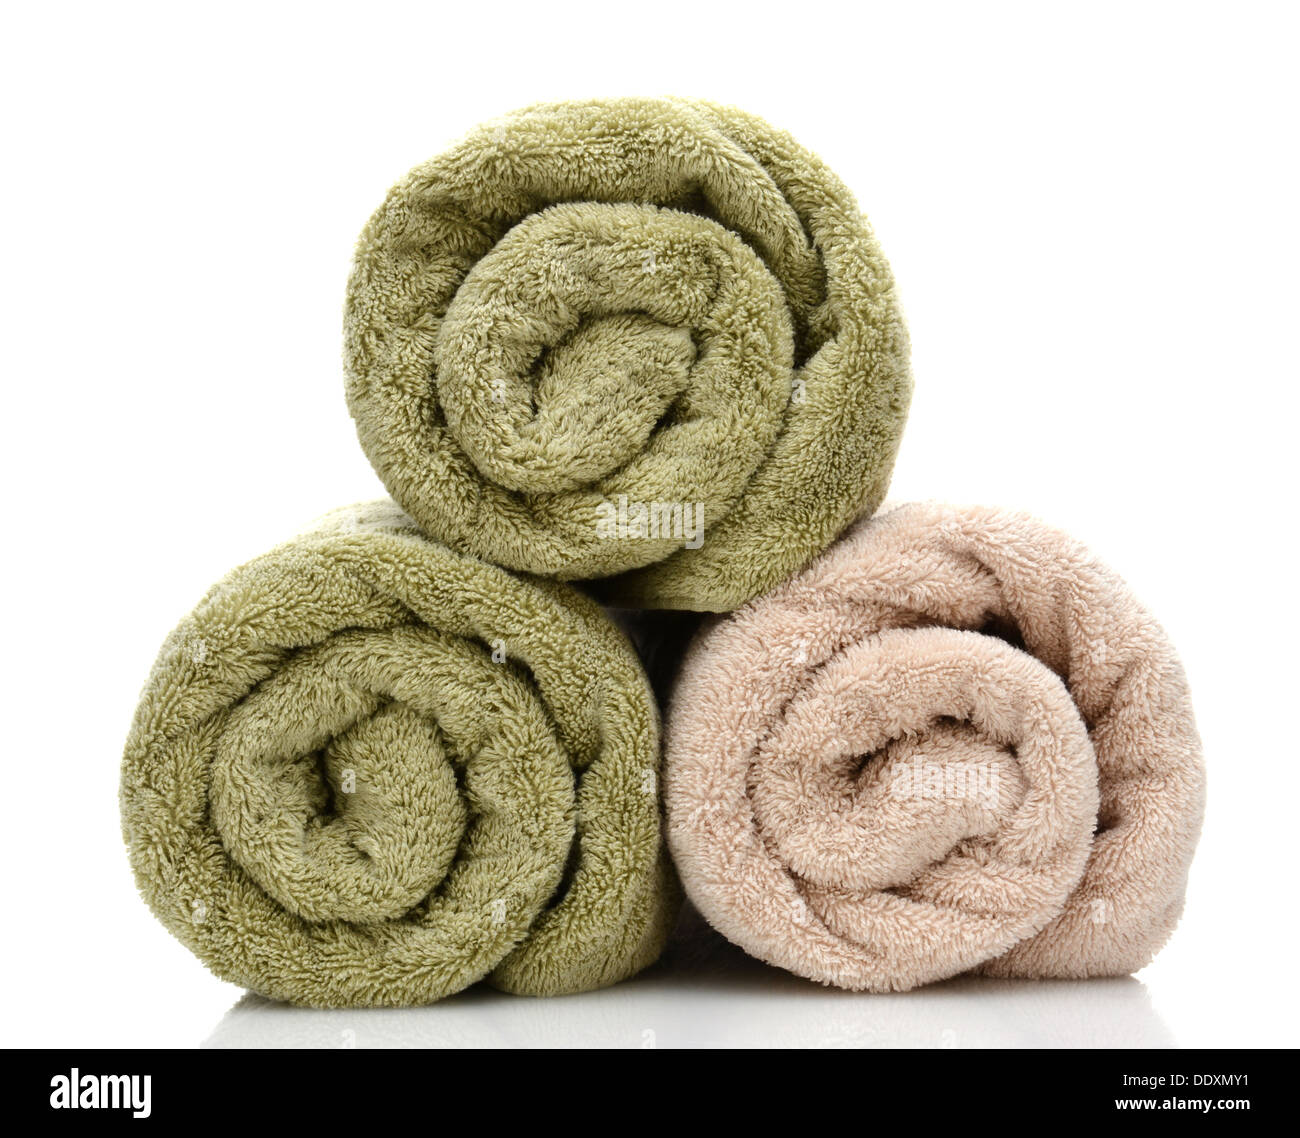 Three rolled bath towels freshly laundered on a white background with reflection. Closeup looking at the towel ends. Stock Photo